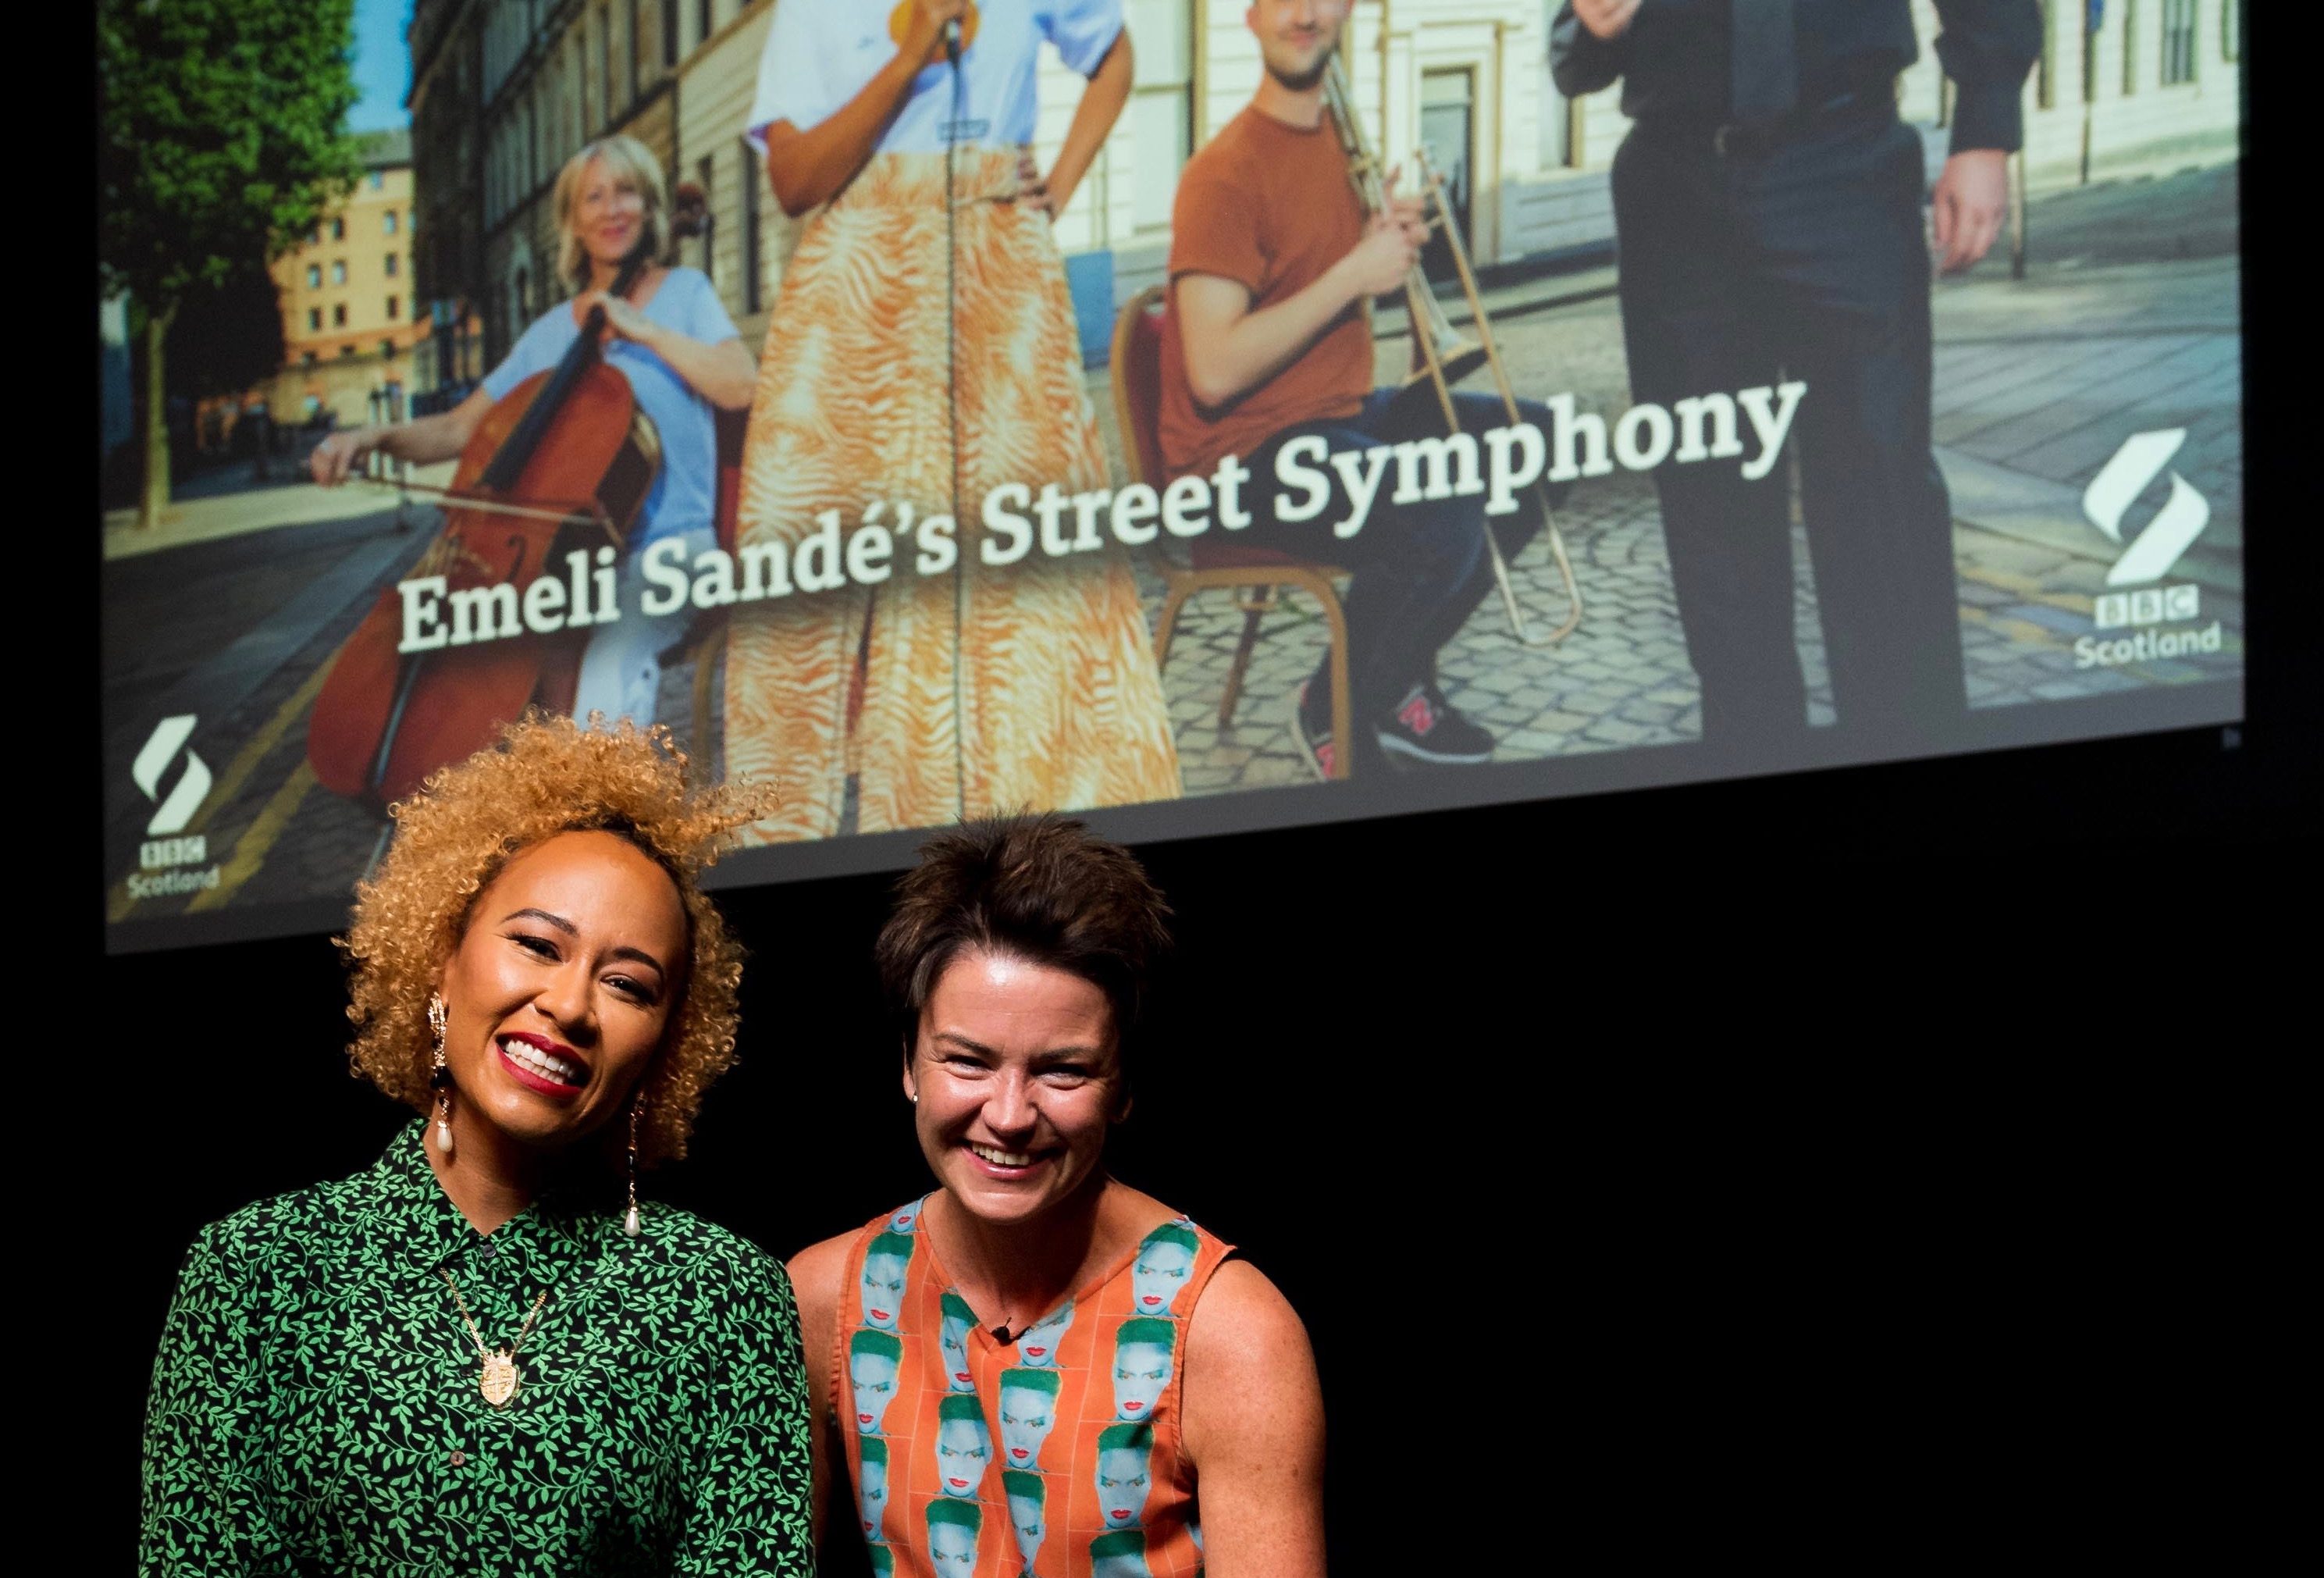 Emeli Sandé with BBC Scotland's Fiona Stalker who led the singer in conversation after a screening of her new programme, Emeli Sandé's Street Symphony at the Lemon Tree in Aberdeen.